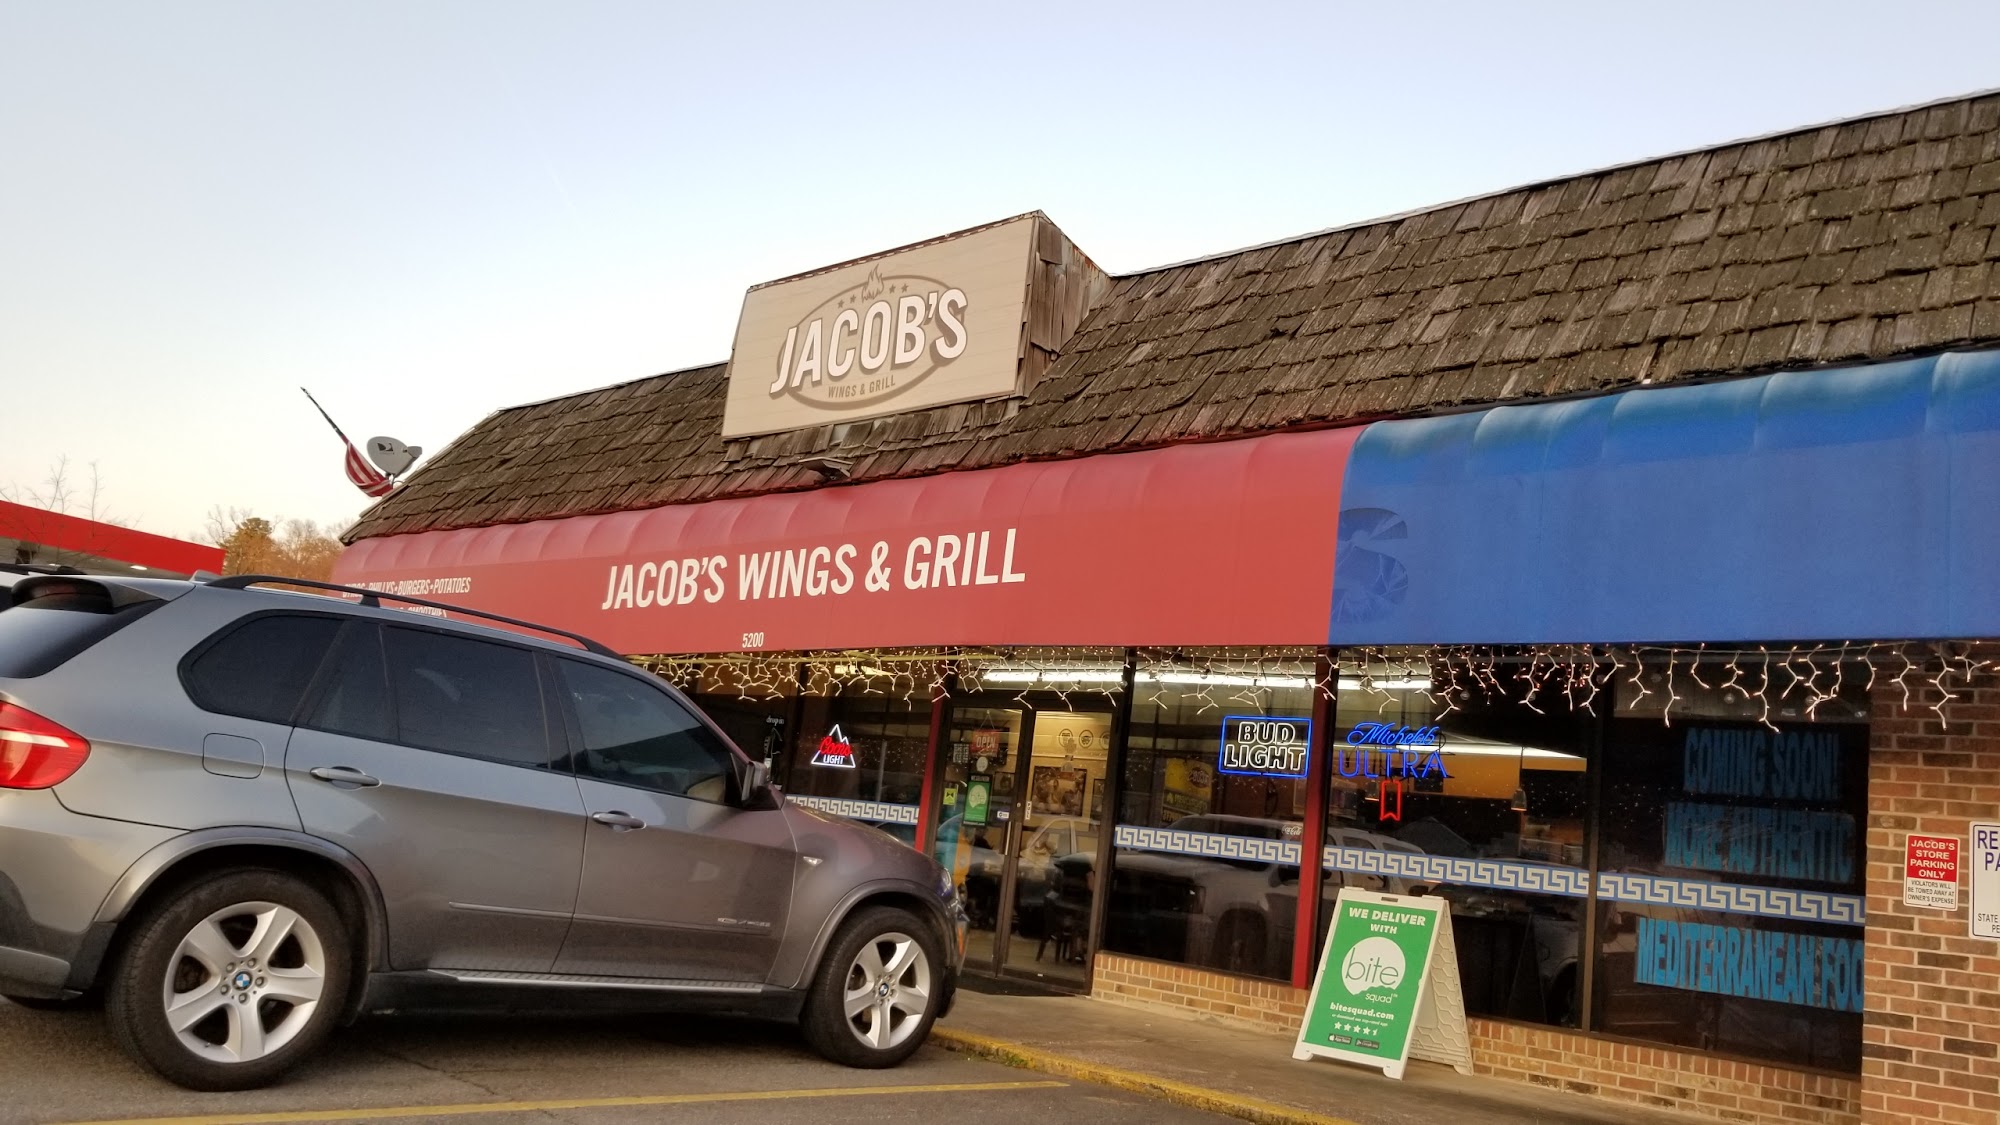 Jacob's Wings & Grill